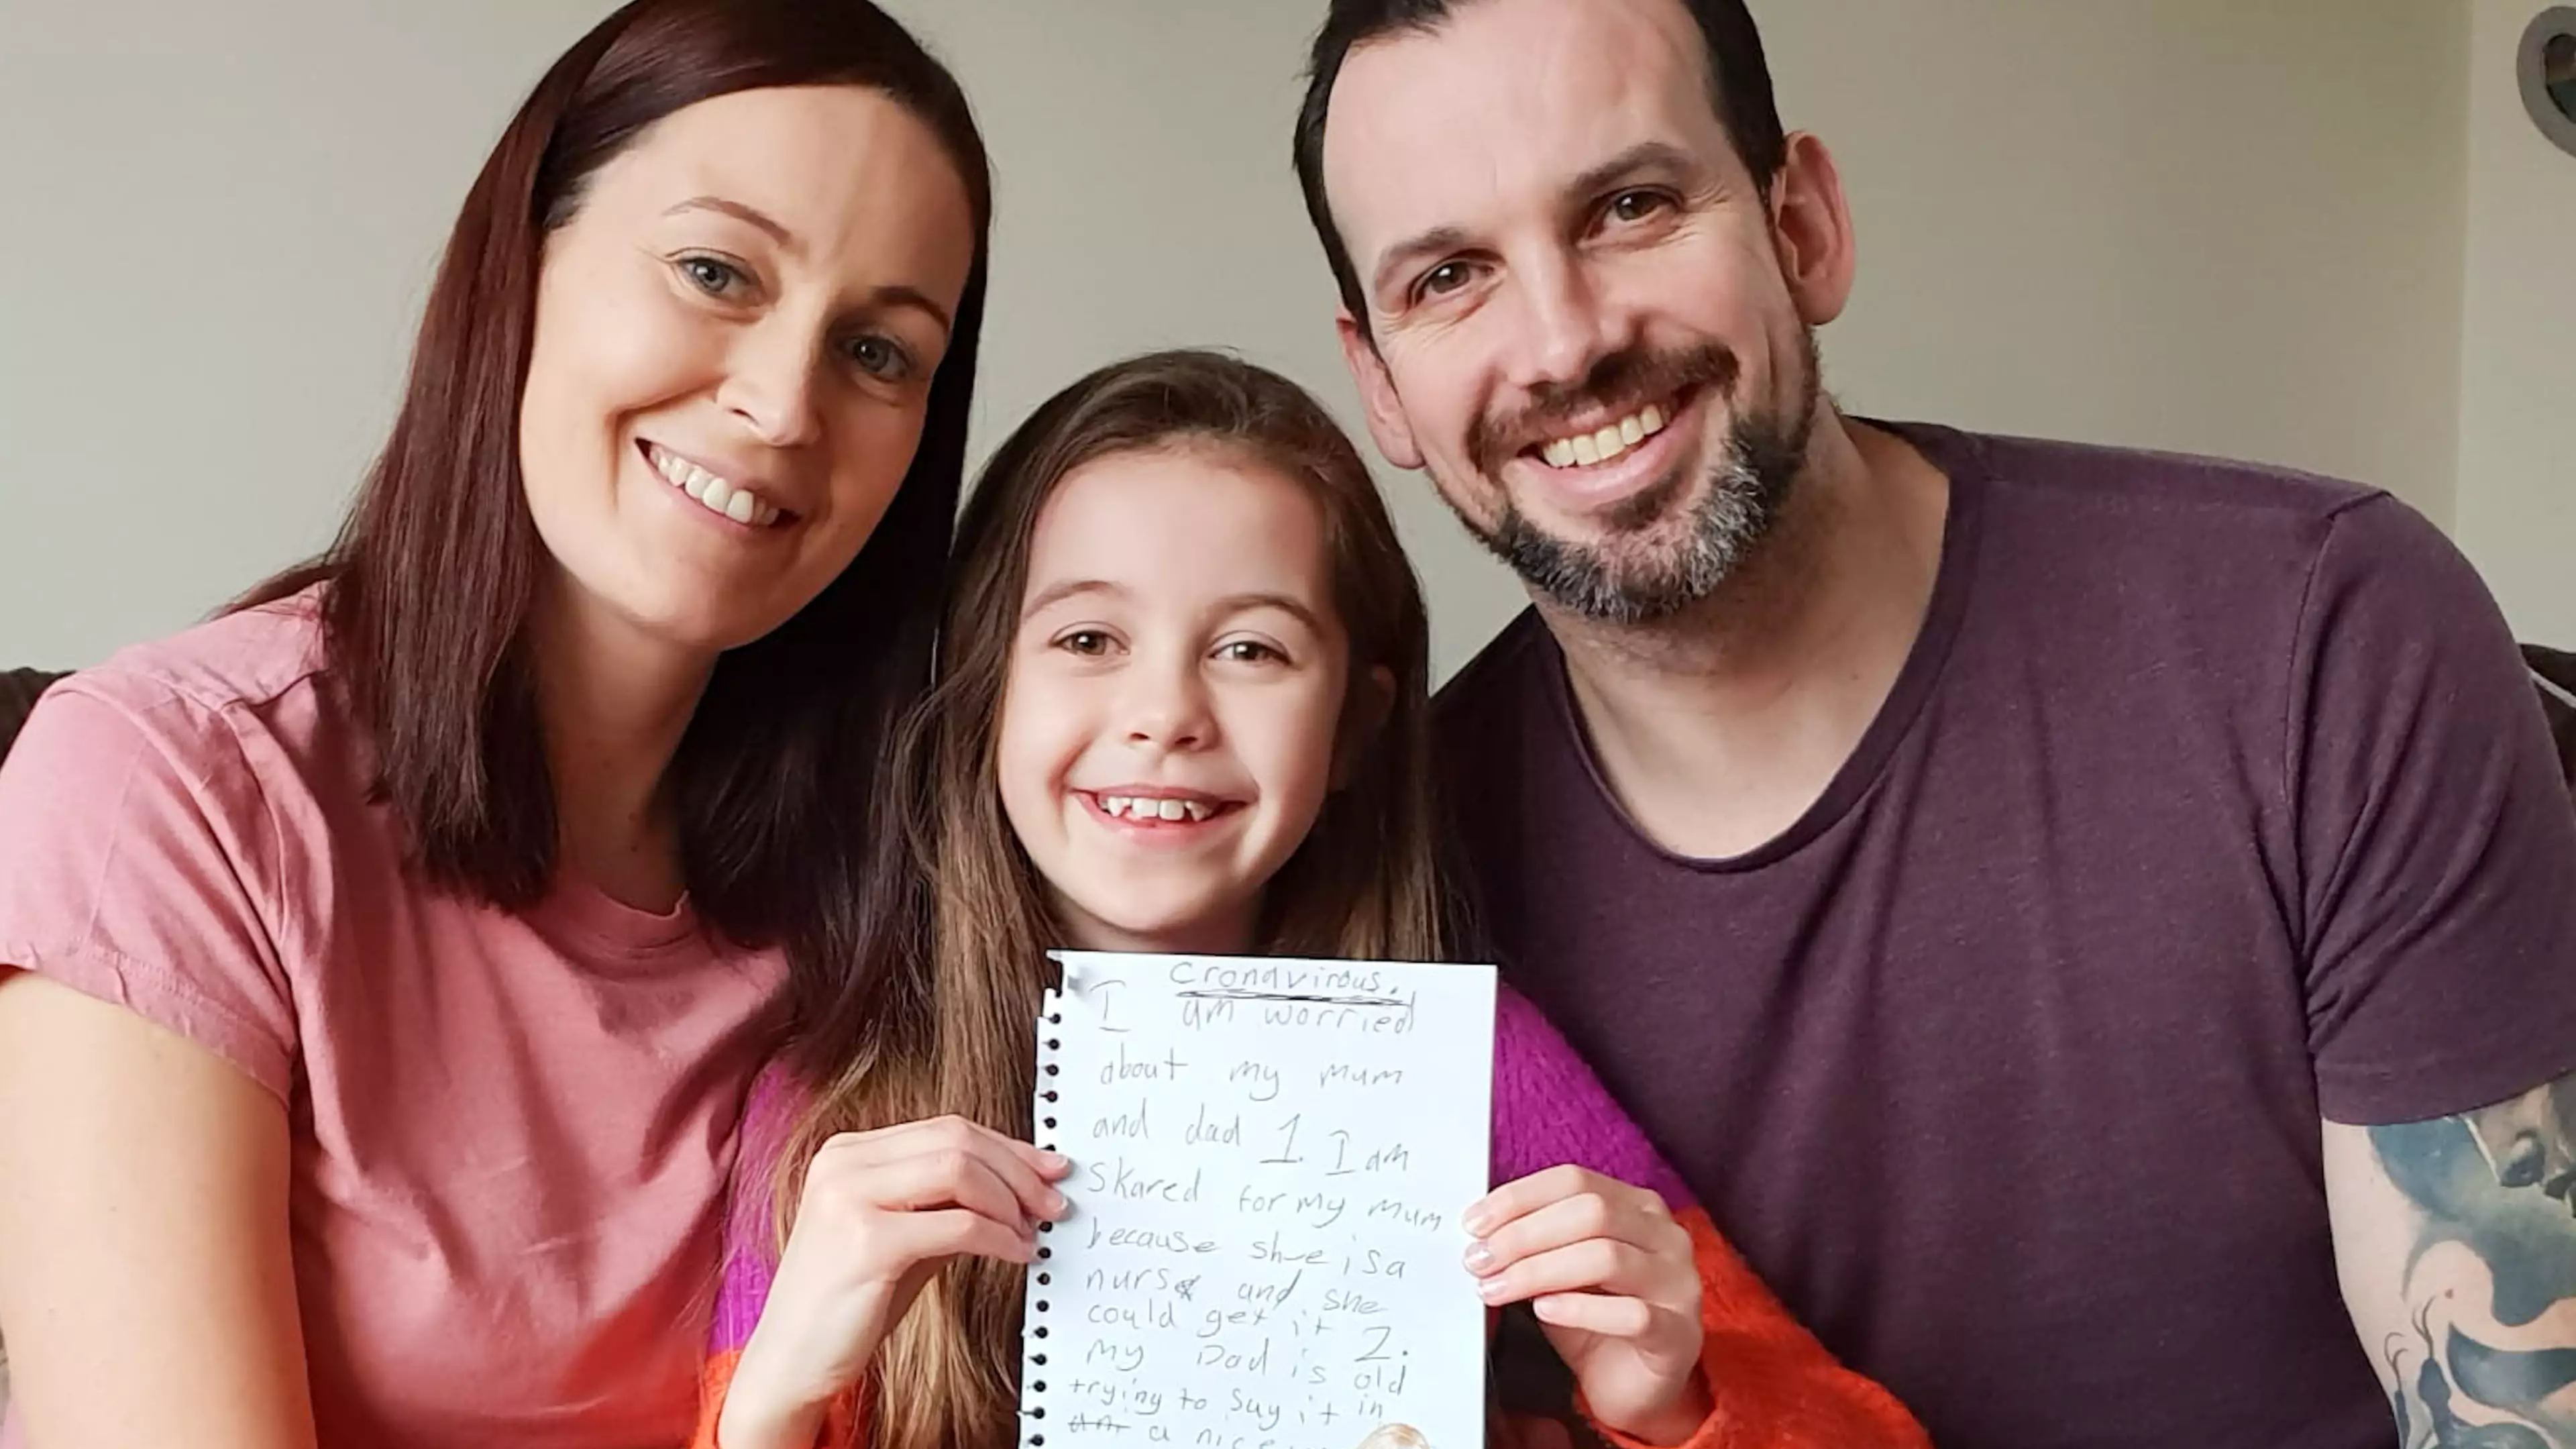 Young Girl Writes Heartbreaking Letter Saying She's Scared For Her Parents Amid Coronavirus Outbreak